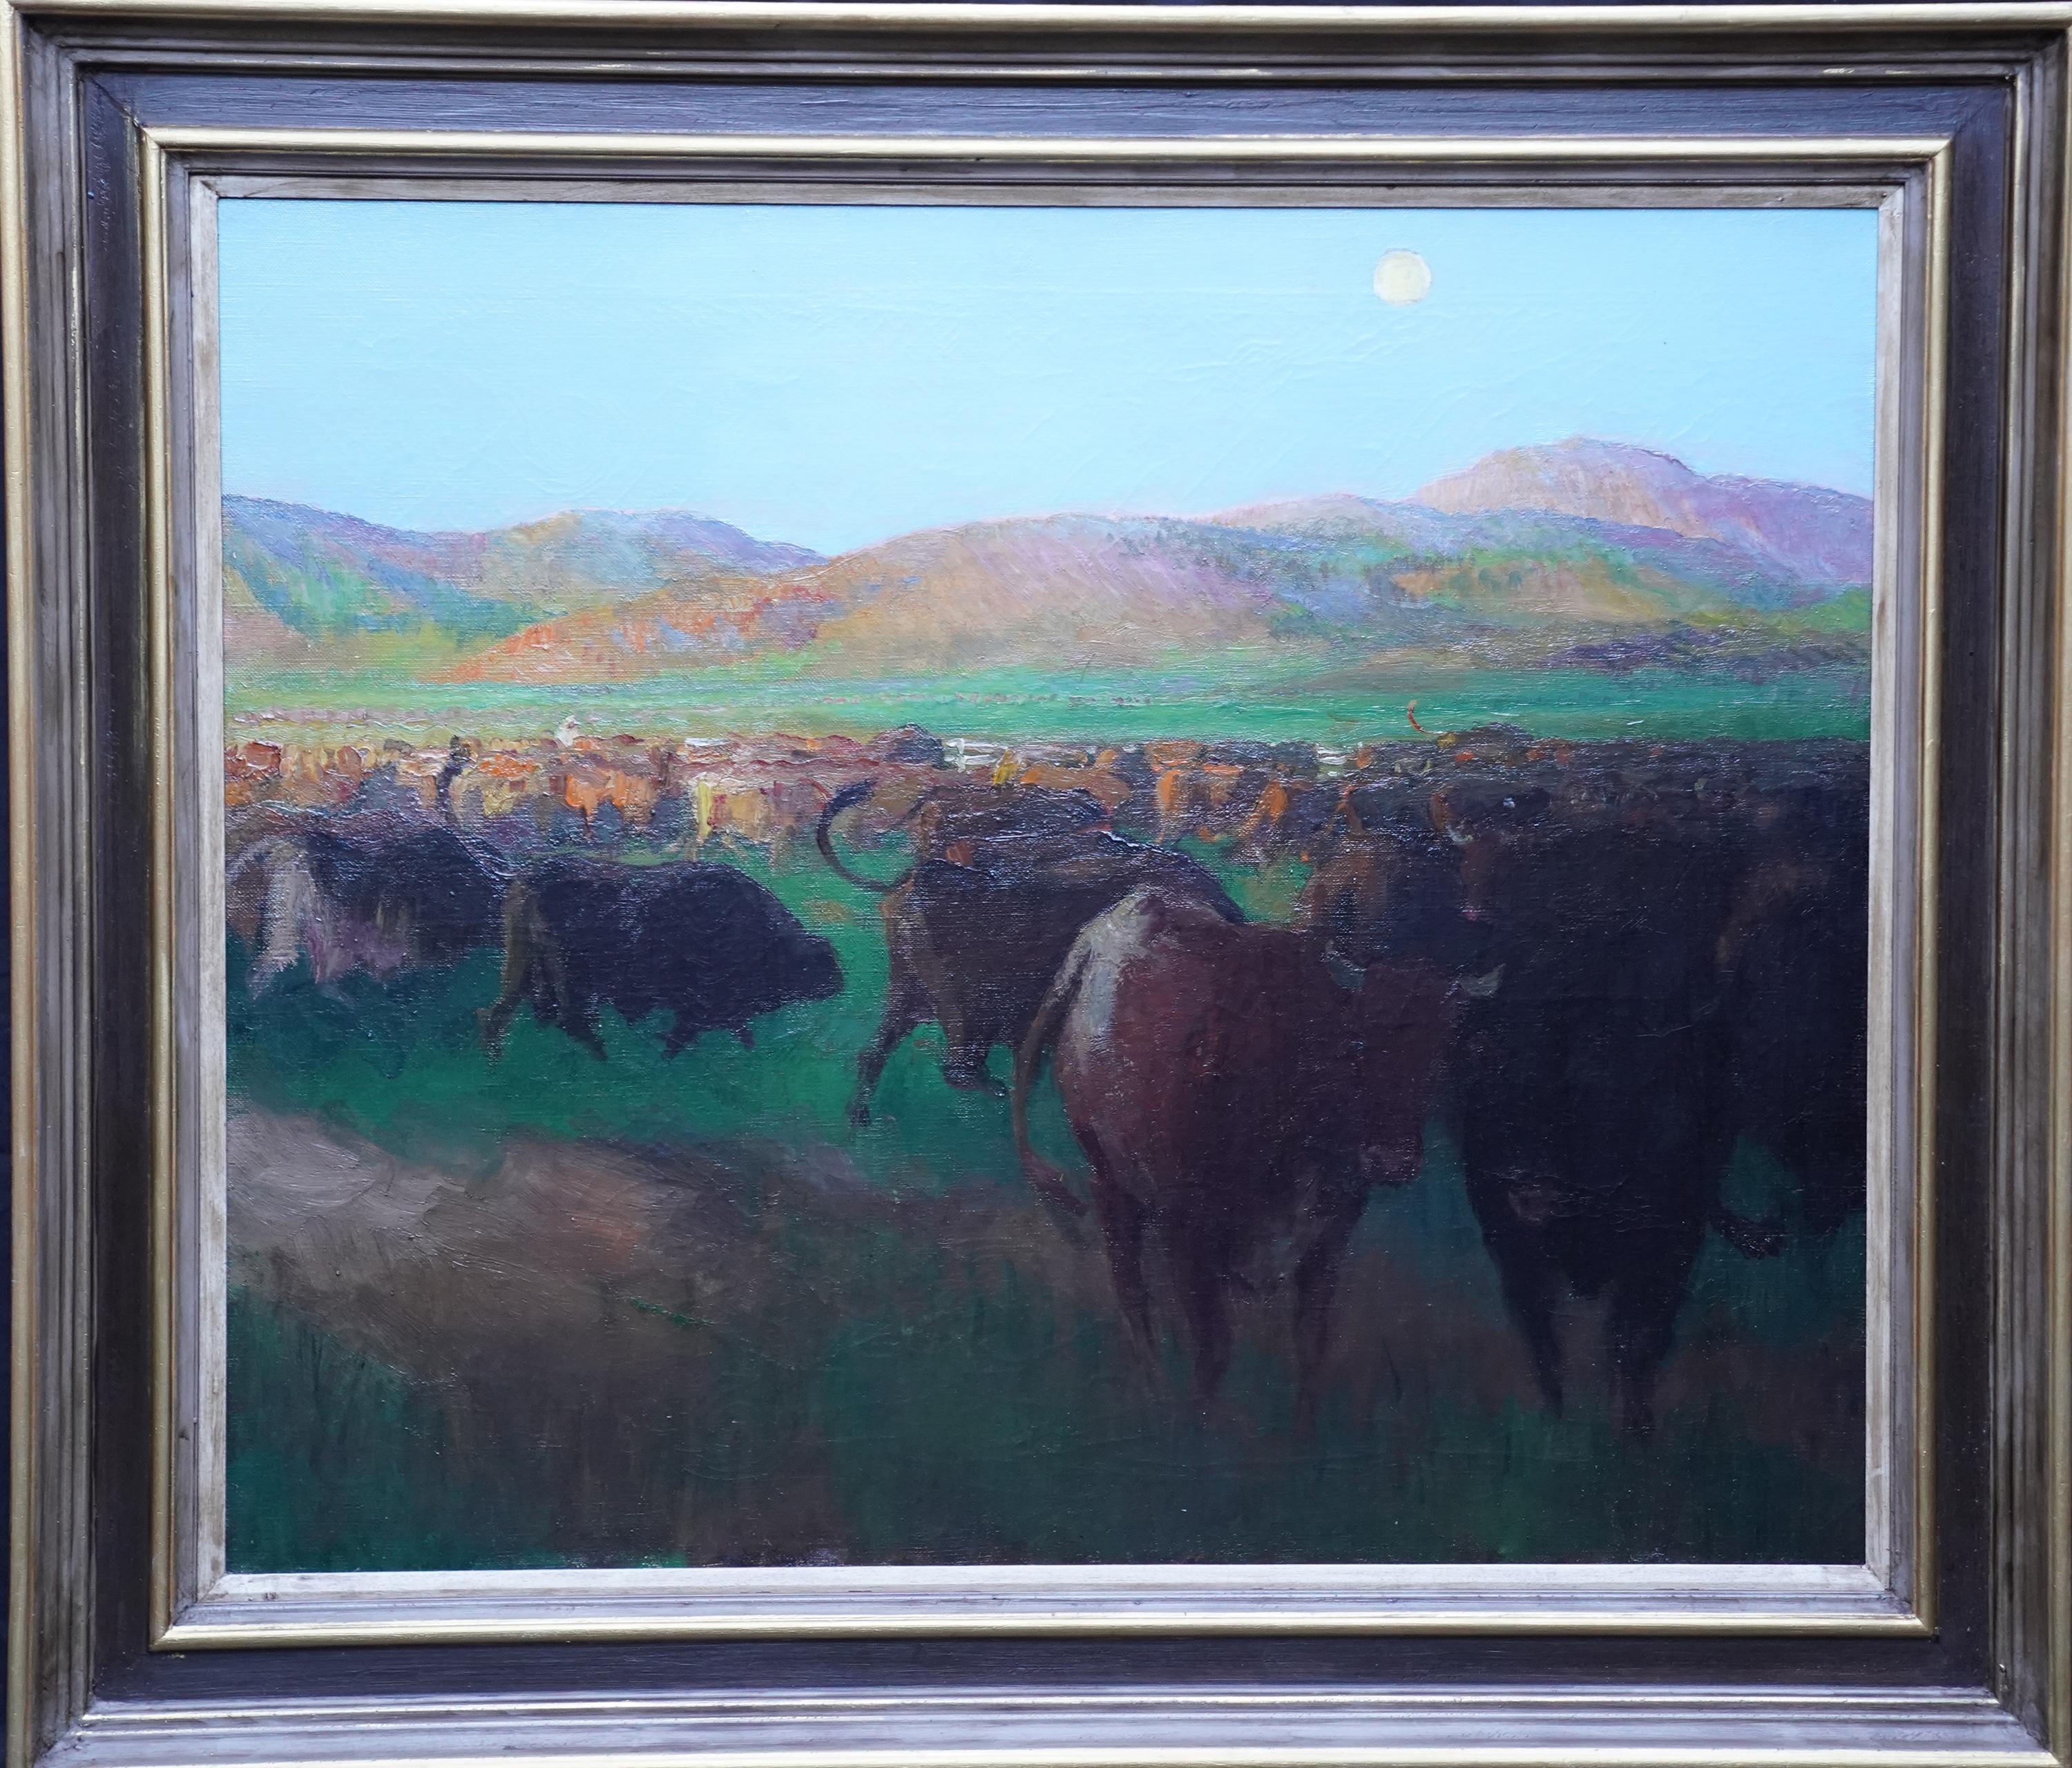 Spencer Pryse Landscape Painting - Cattle in a Landscape North Africa - British 20s Post Impressionist oil painting